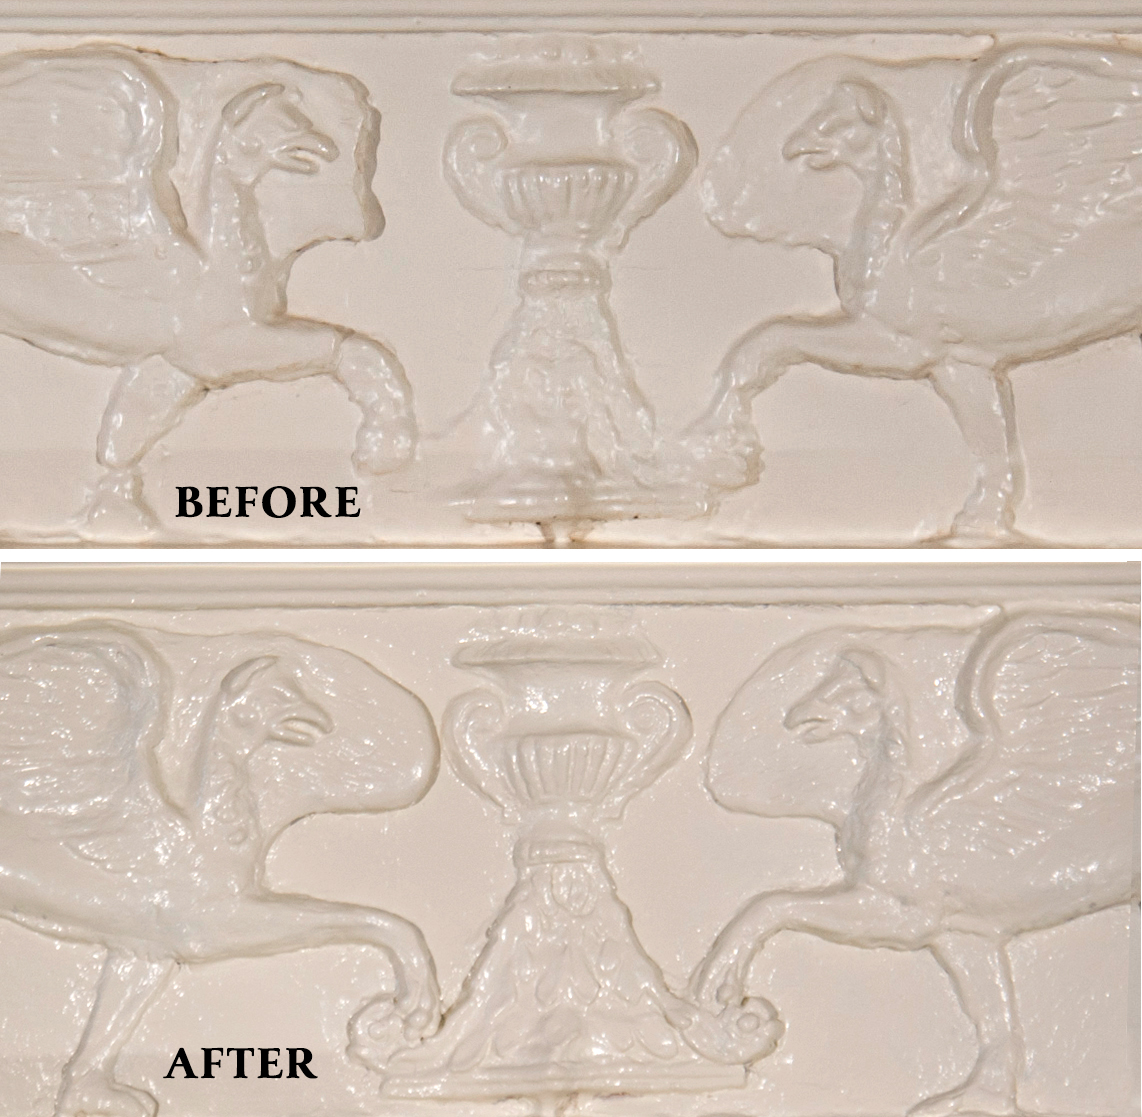 The central elements on the Hall mantel frieze, before restoration and after restoration